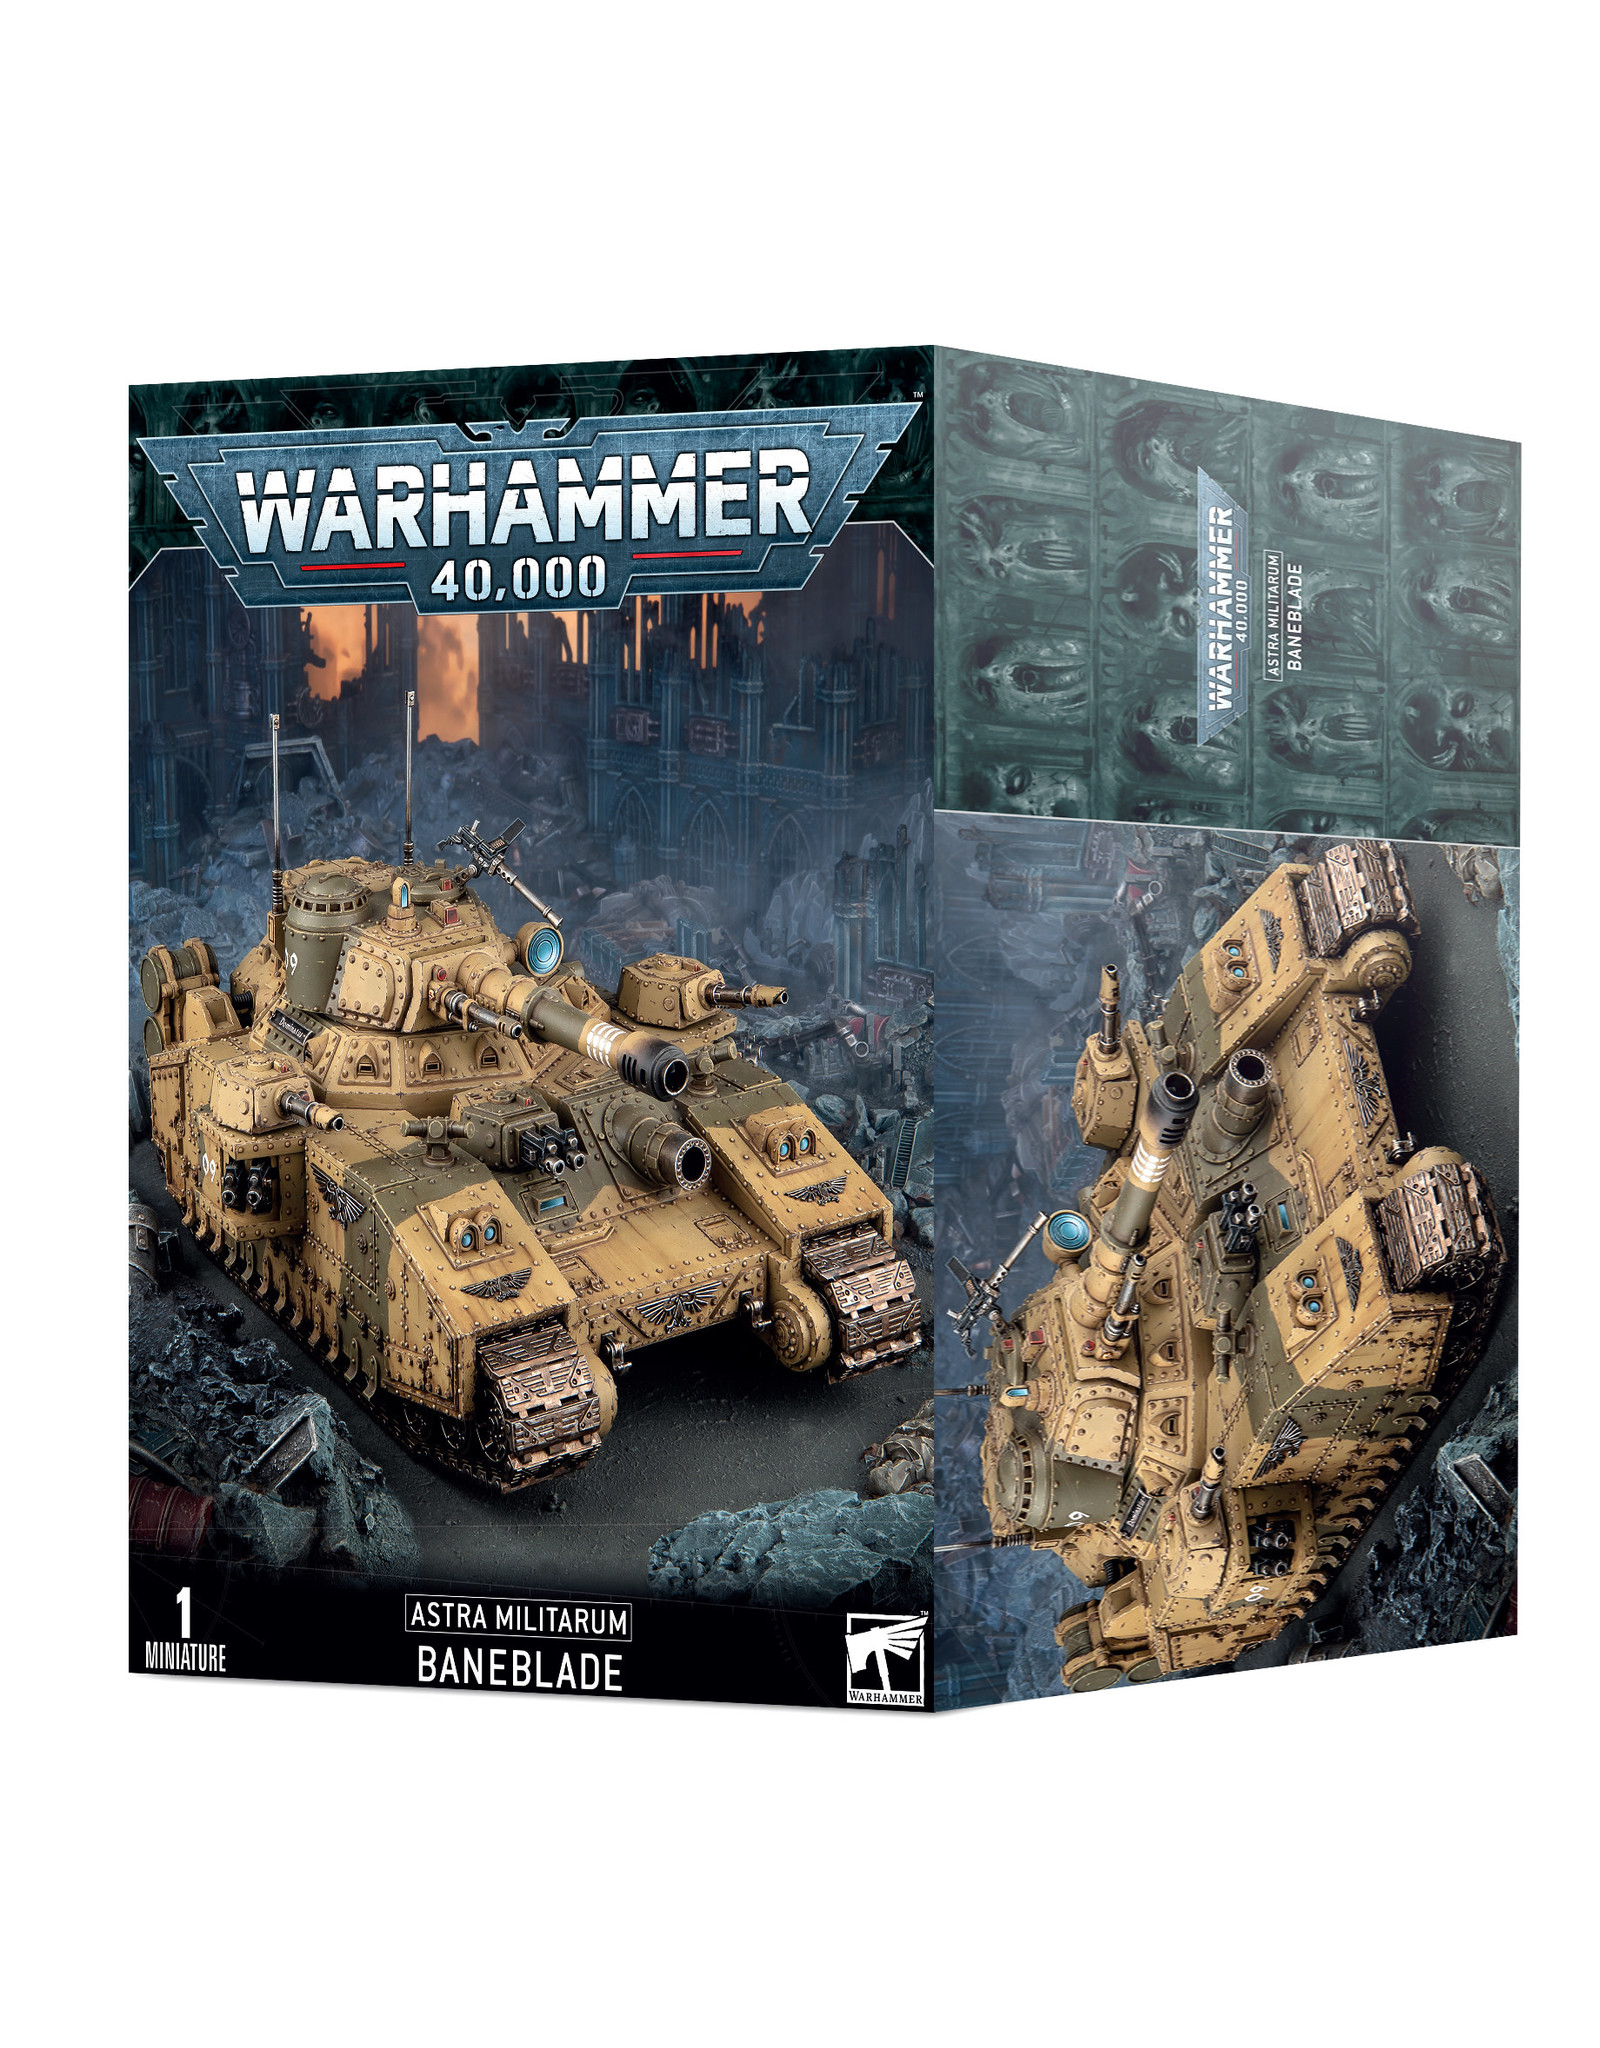 The Best Astra Militarum Model Kits To Collect For Warhammer 40k